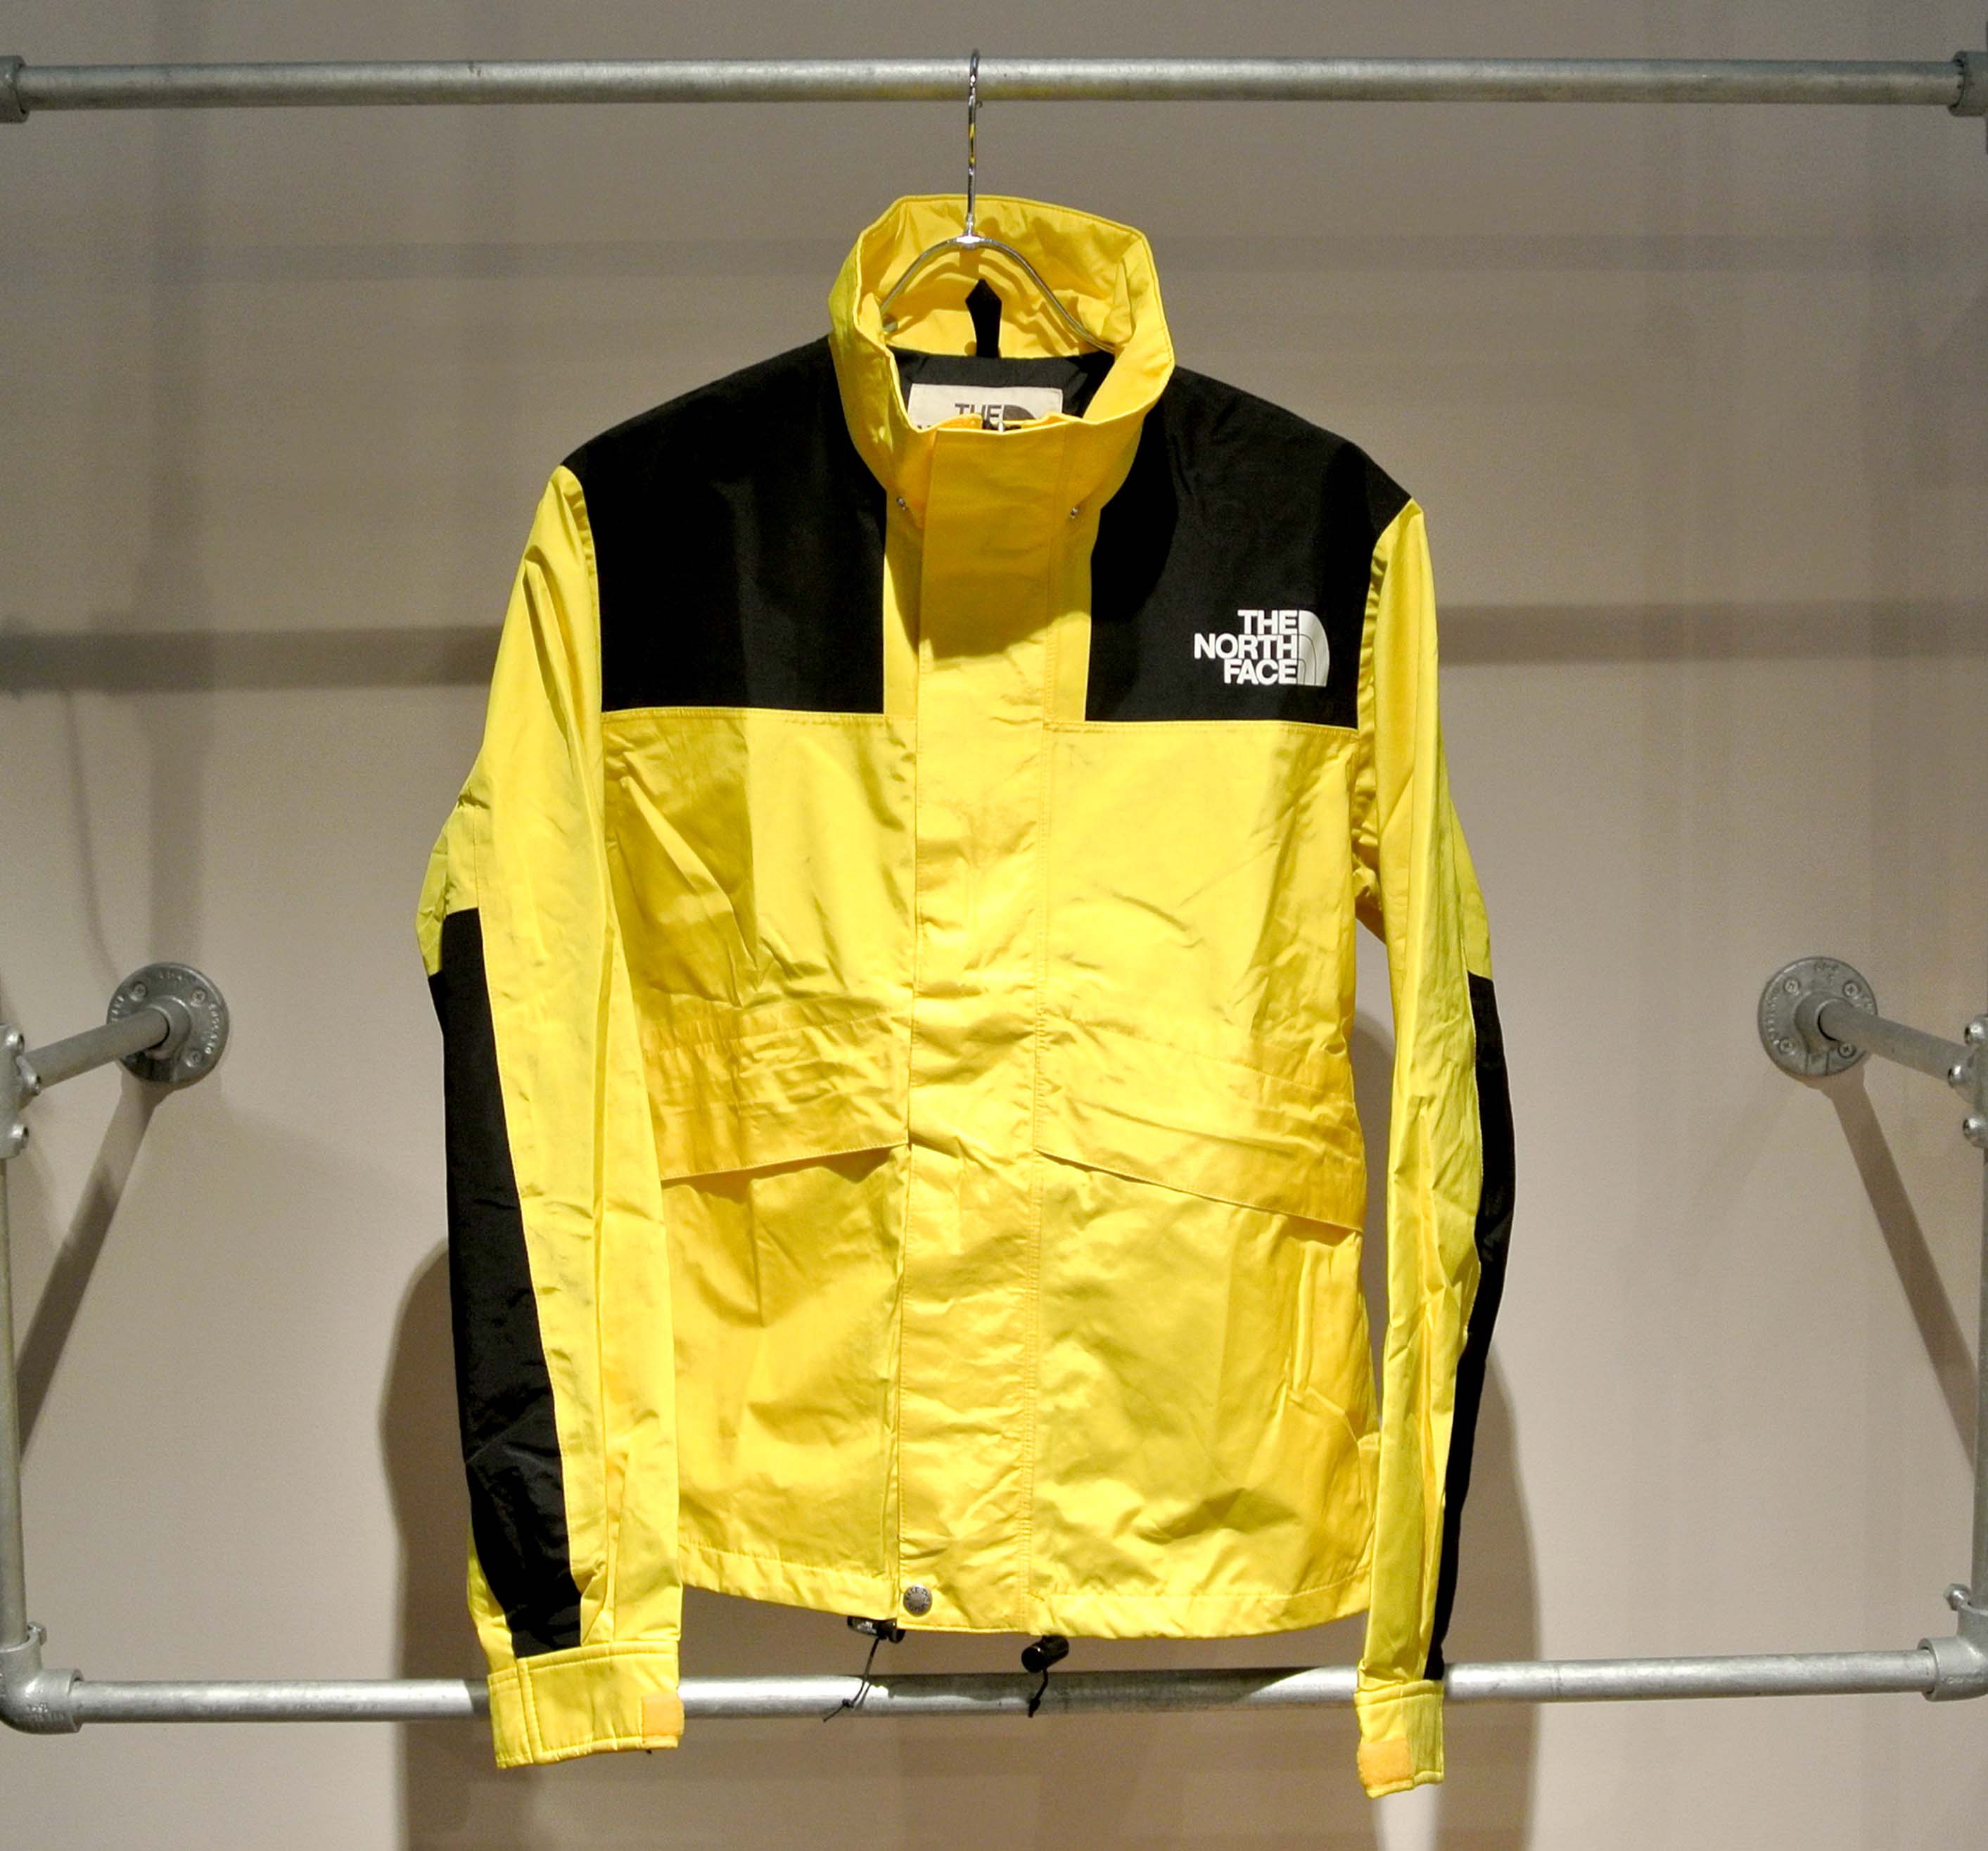 Unraveling the History of 'THE NORTH FACE' through High-Spec Model